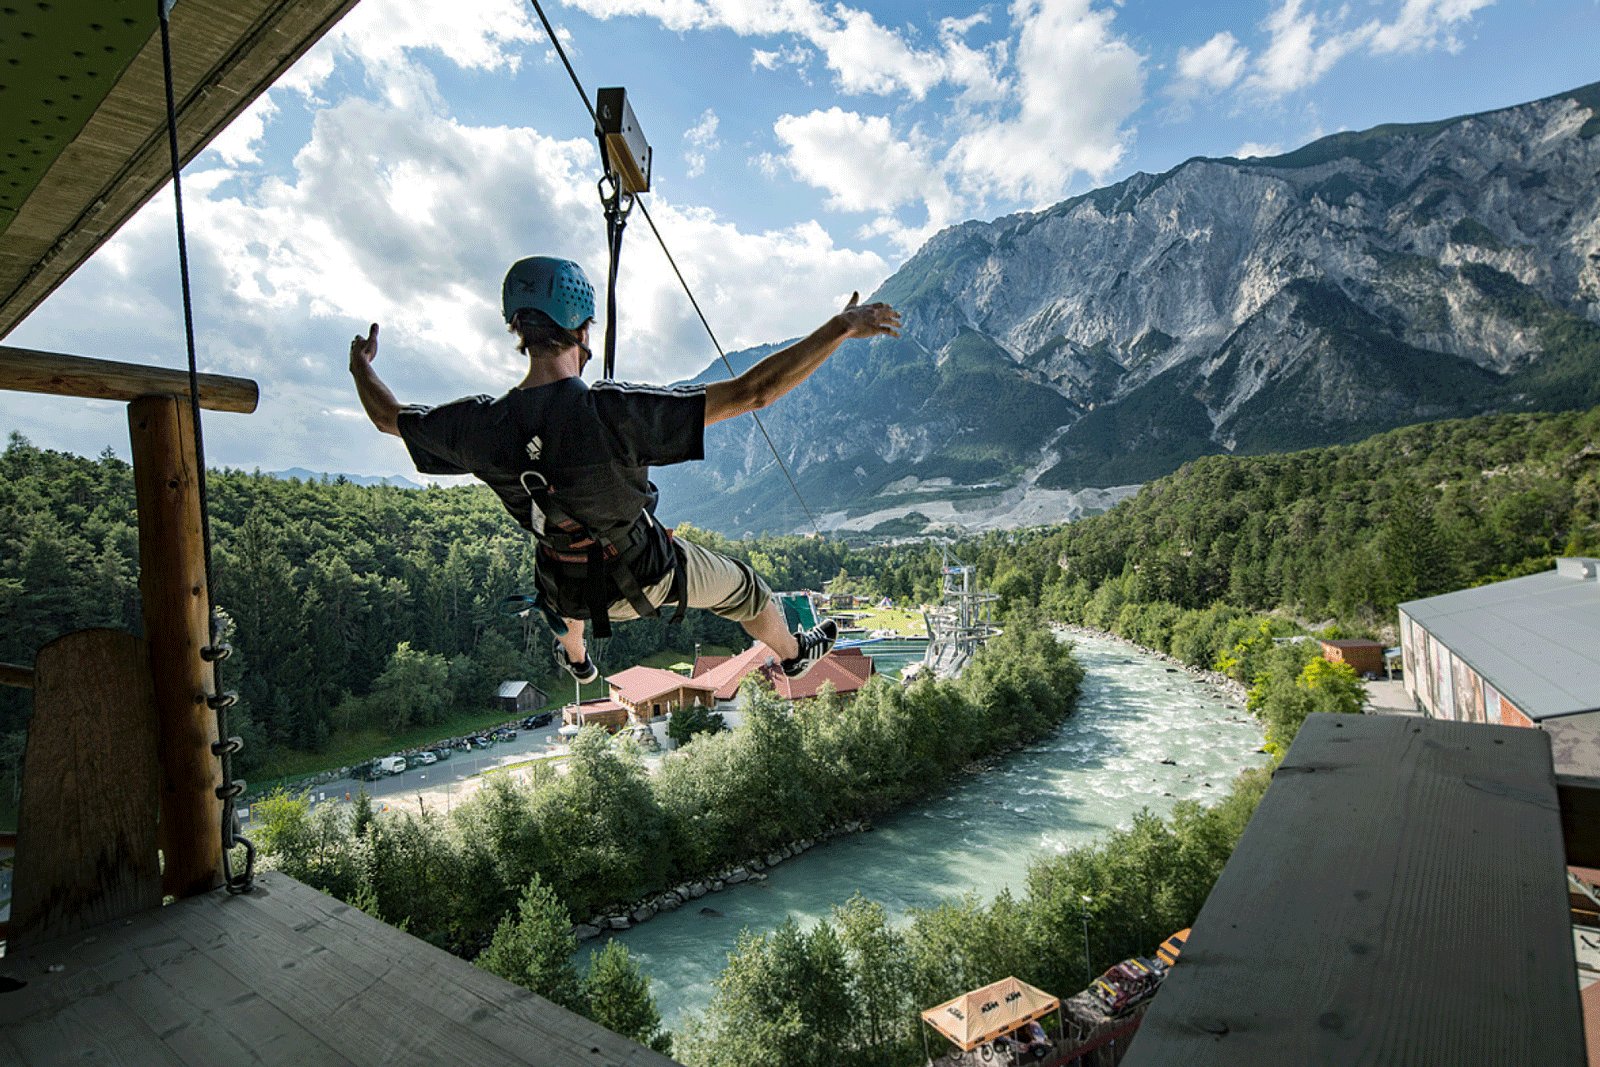 How to take a ride on the world's most feraful rope road in Schwyz